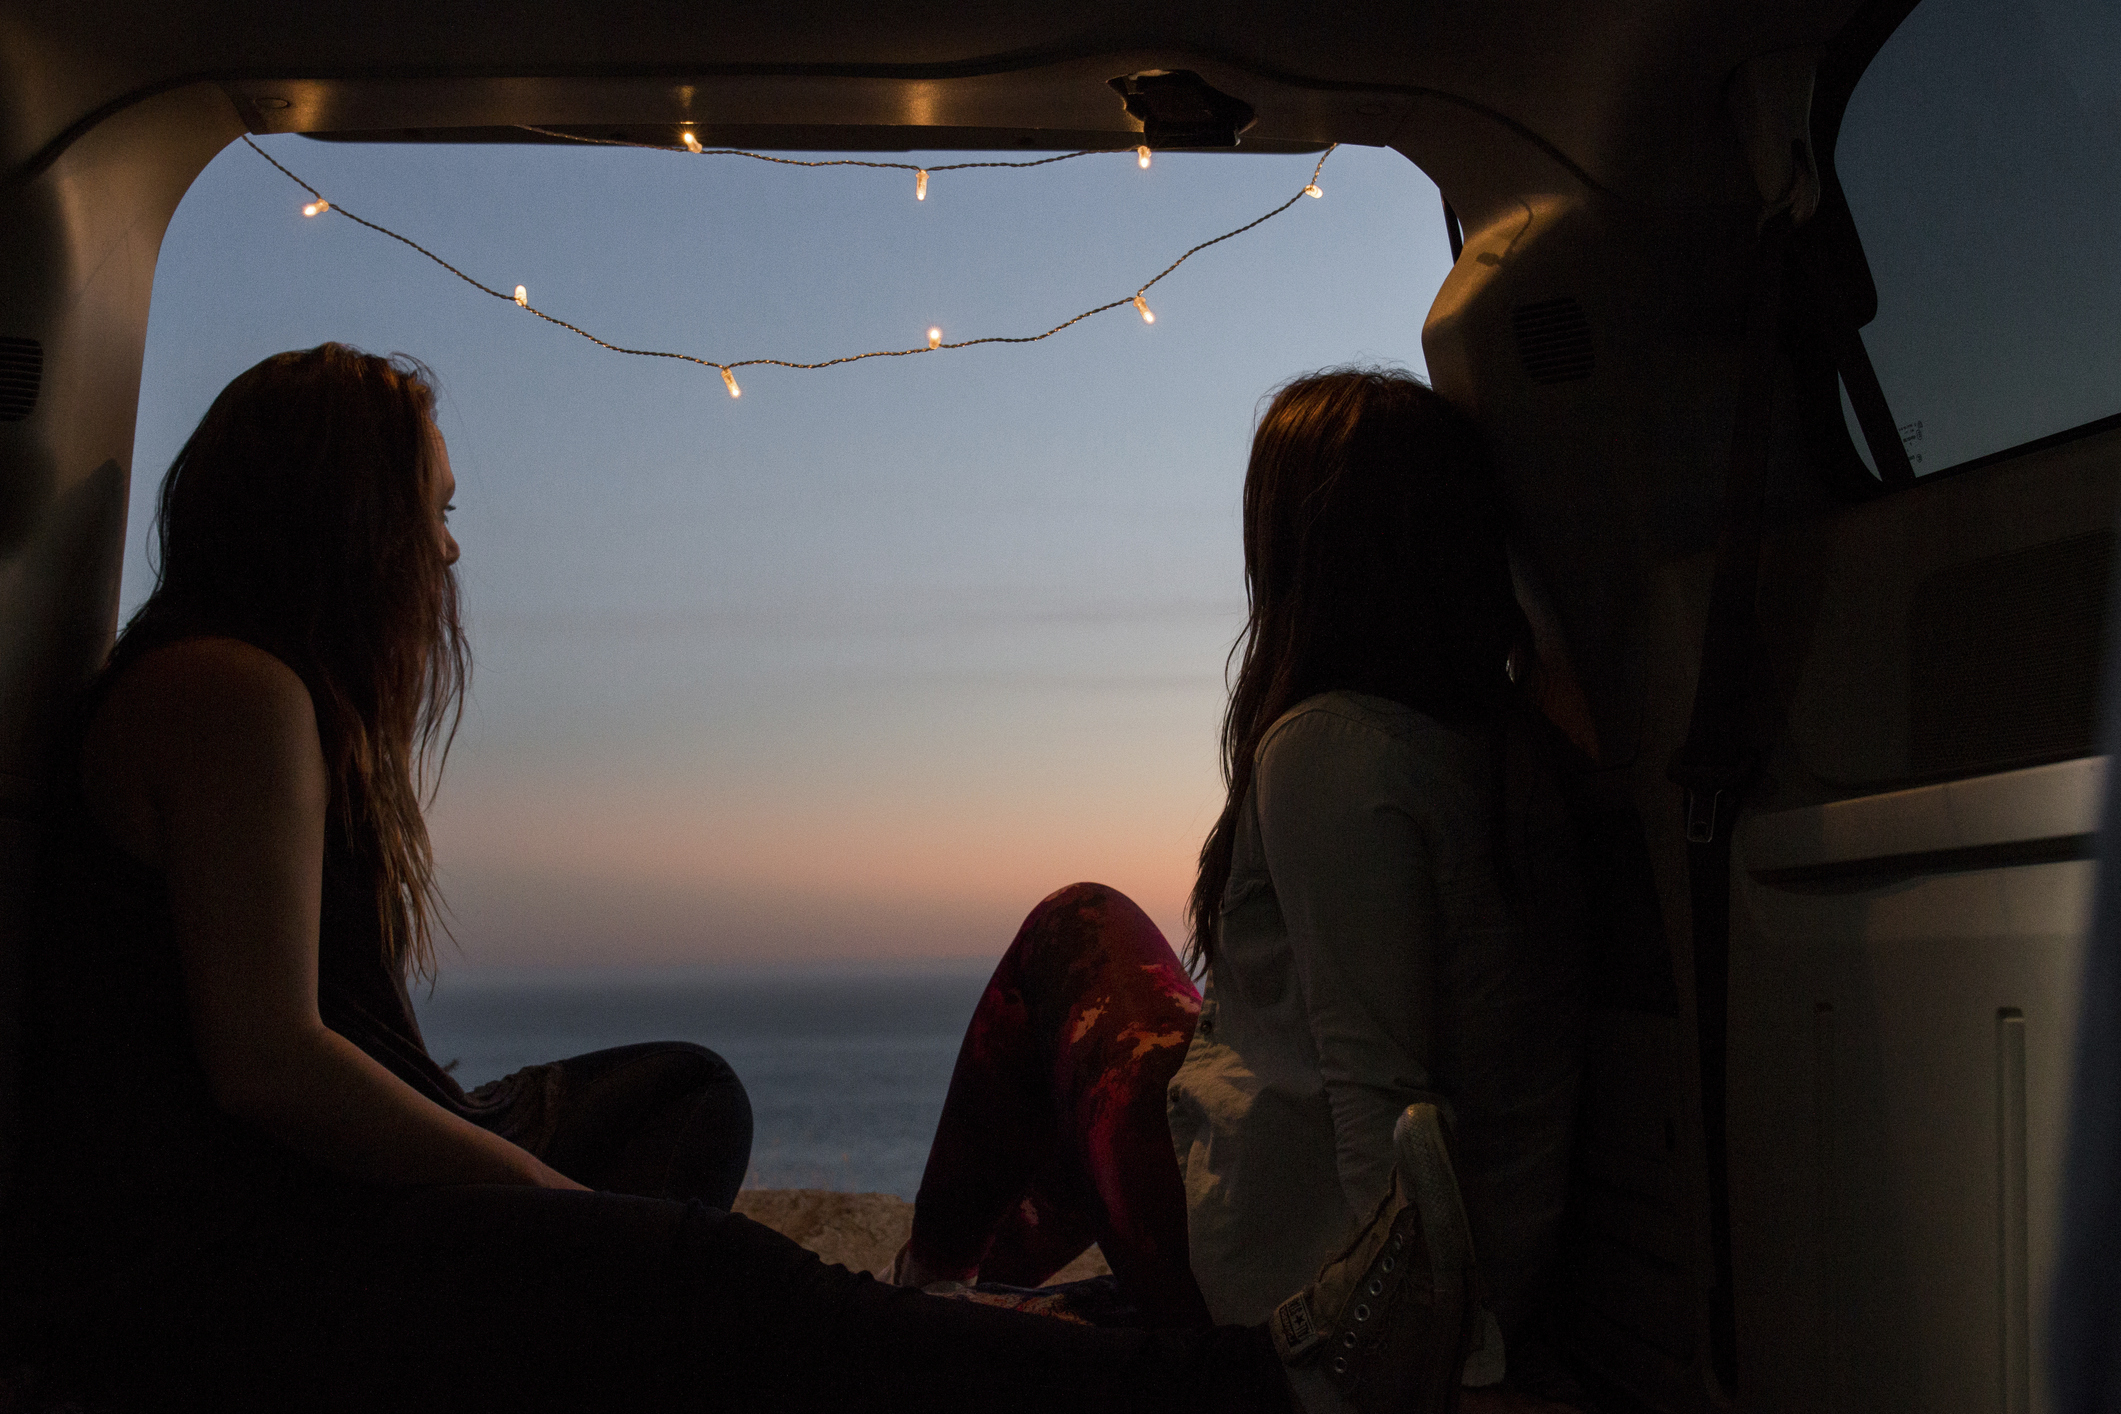 Two people sitting in a van&#x27;s open trunk, facing a sunset, with a string of lights above